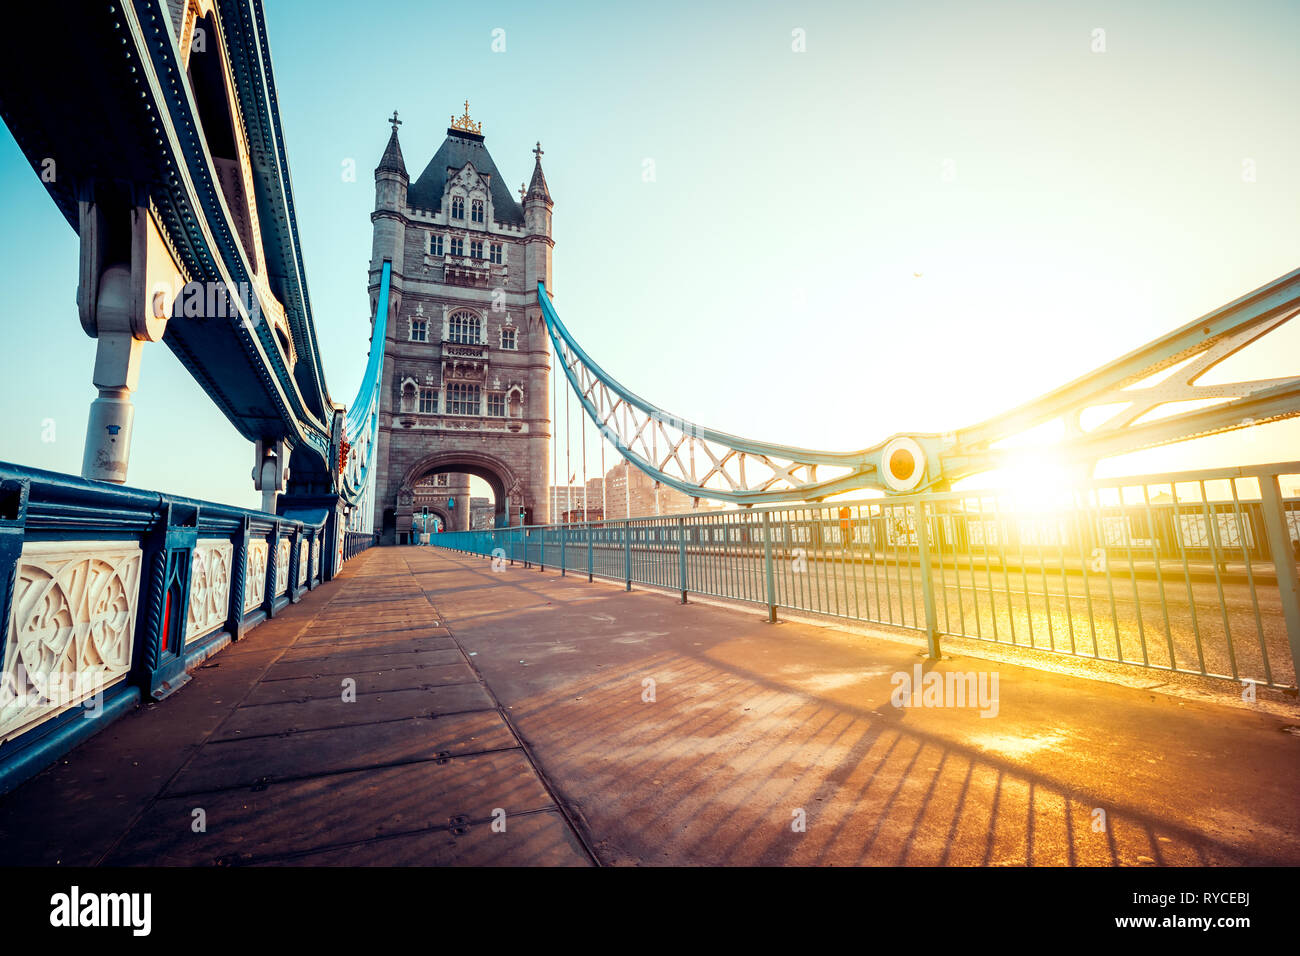 Spectacular Tower Bridge in London at sunset Stock Photo